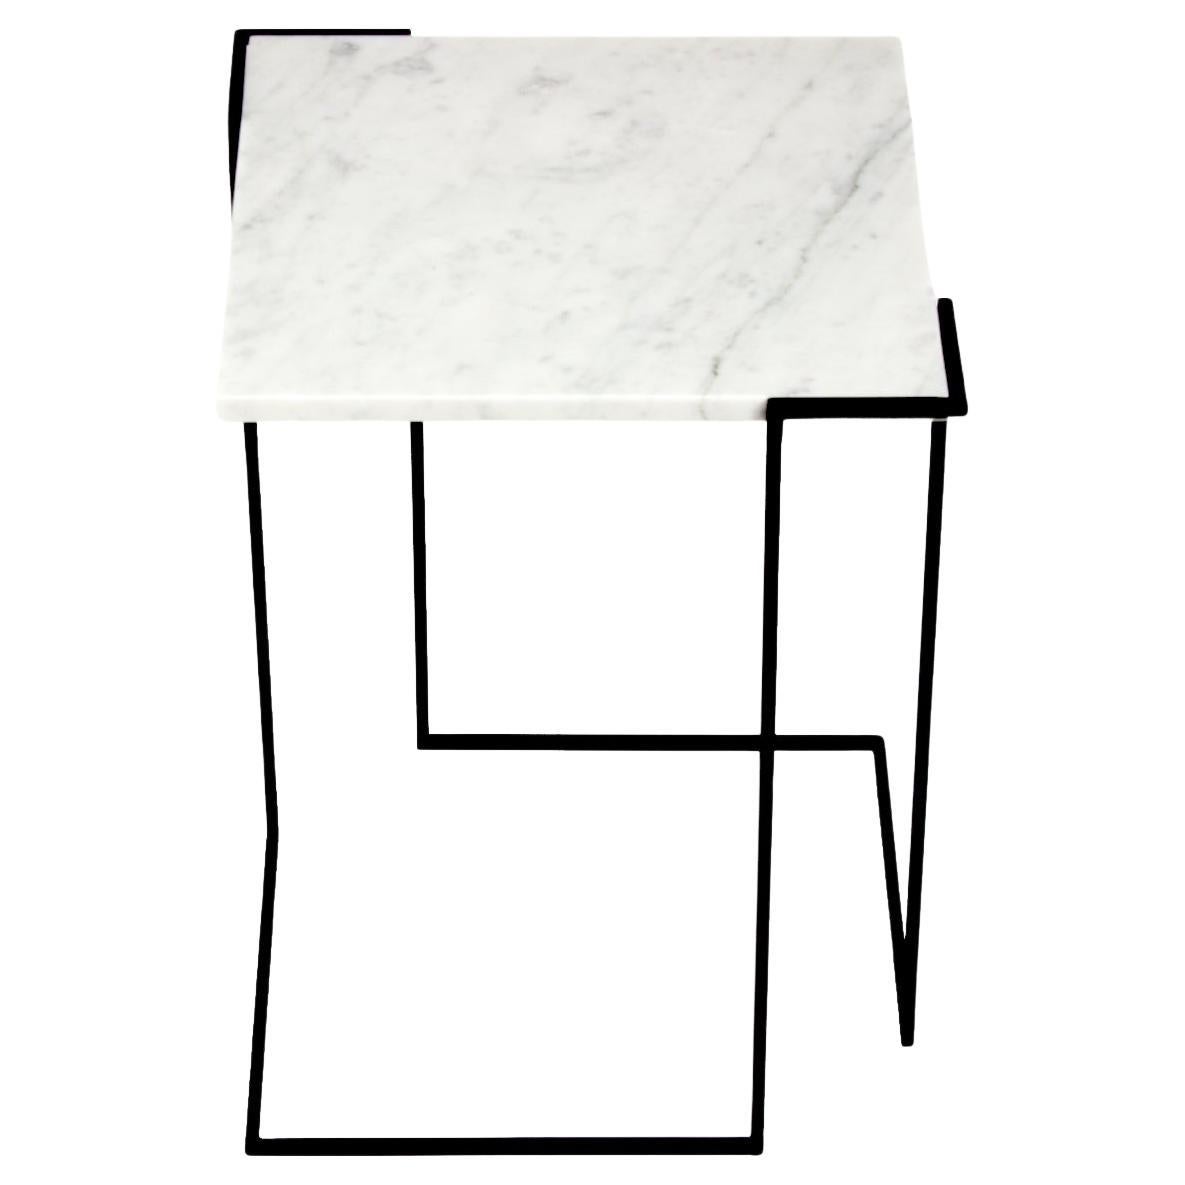 GravitY, Carrara Marble Side Table By DFdesignlab Handmade in Italy